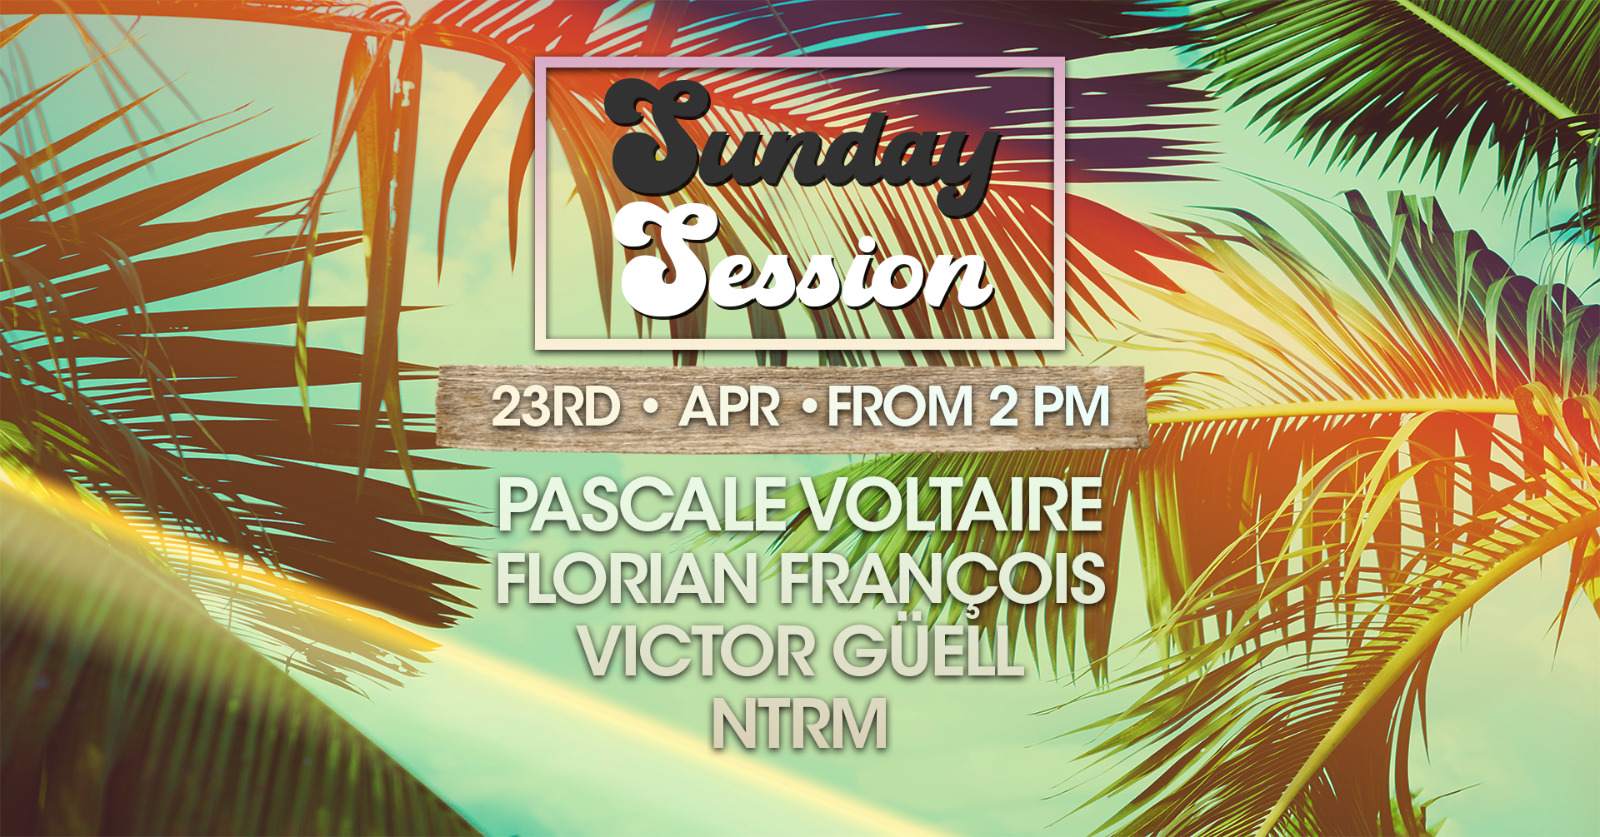 SUNDAY SESSION Open Air with Pascale Voltaire & Victor Güell - FREE ENTRY - フライヤー表